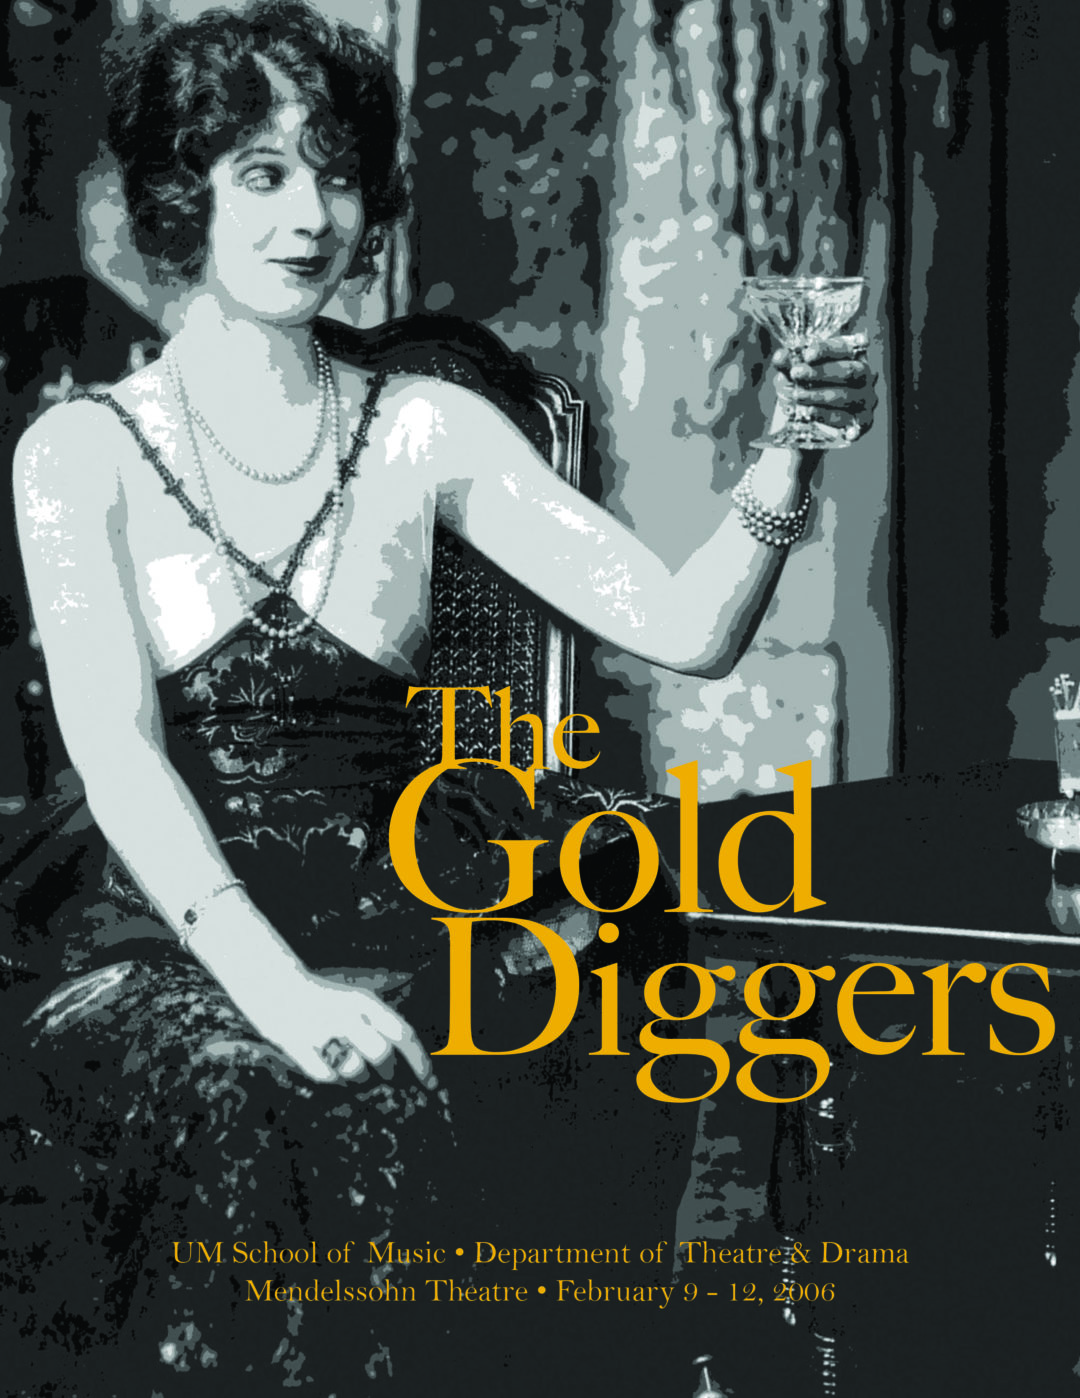 Mercado on TV: Colonial comedy in Gold Diggers, drama in Hijack